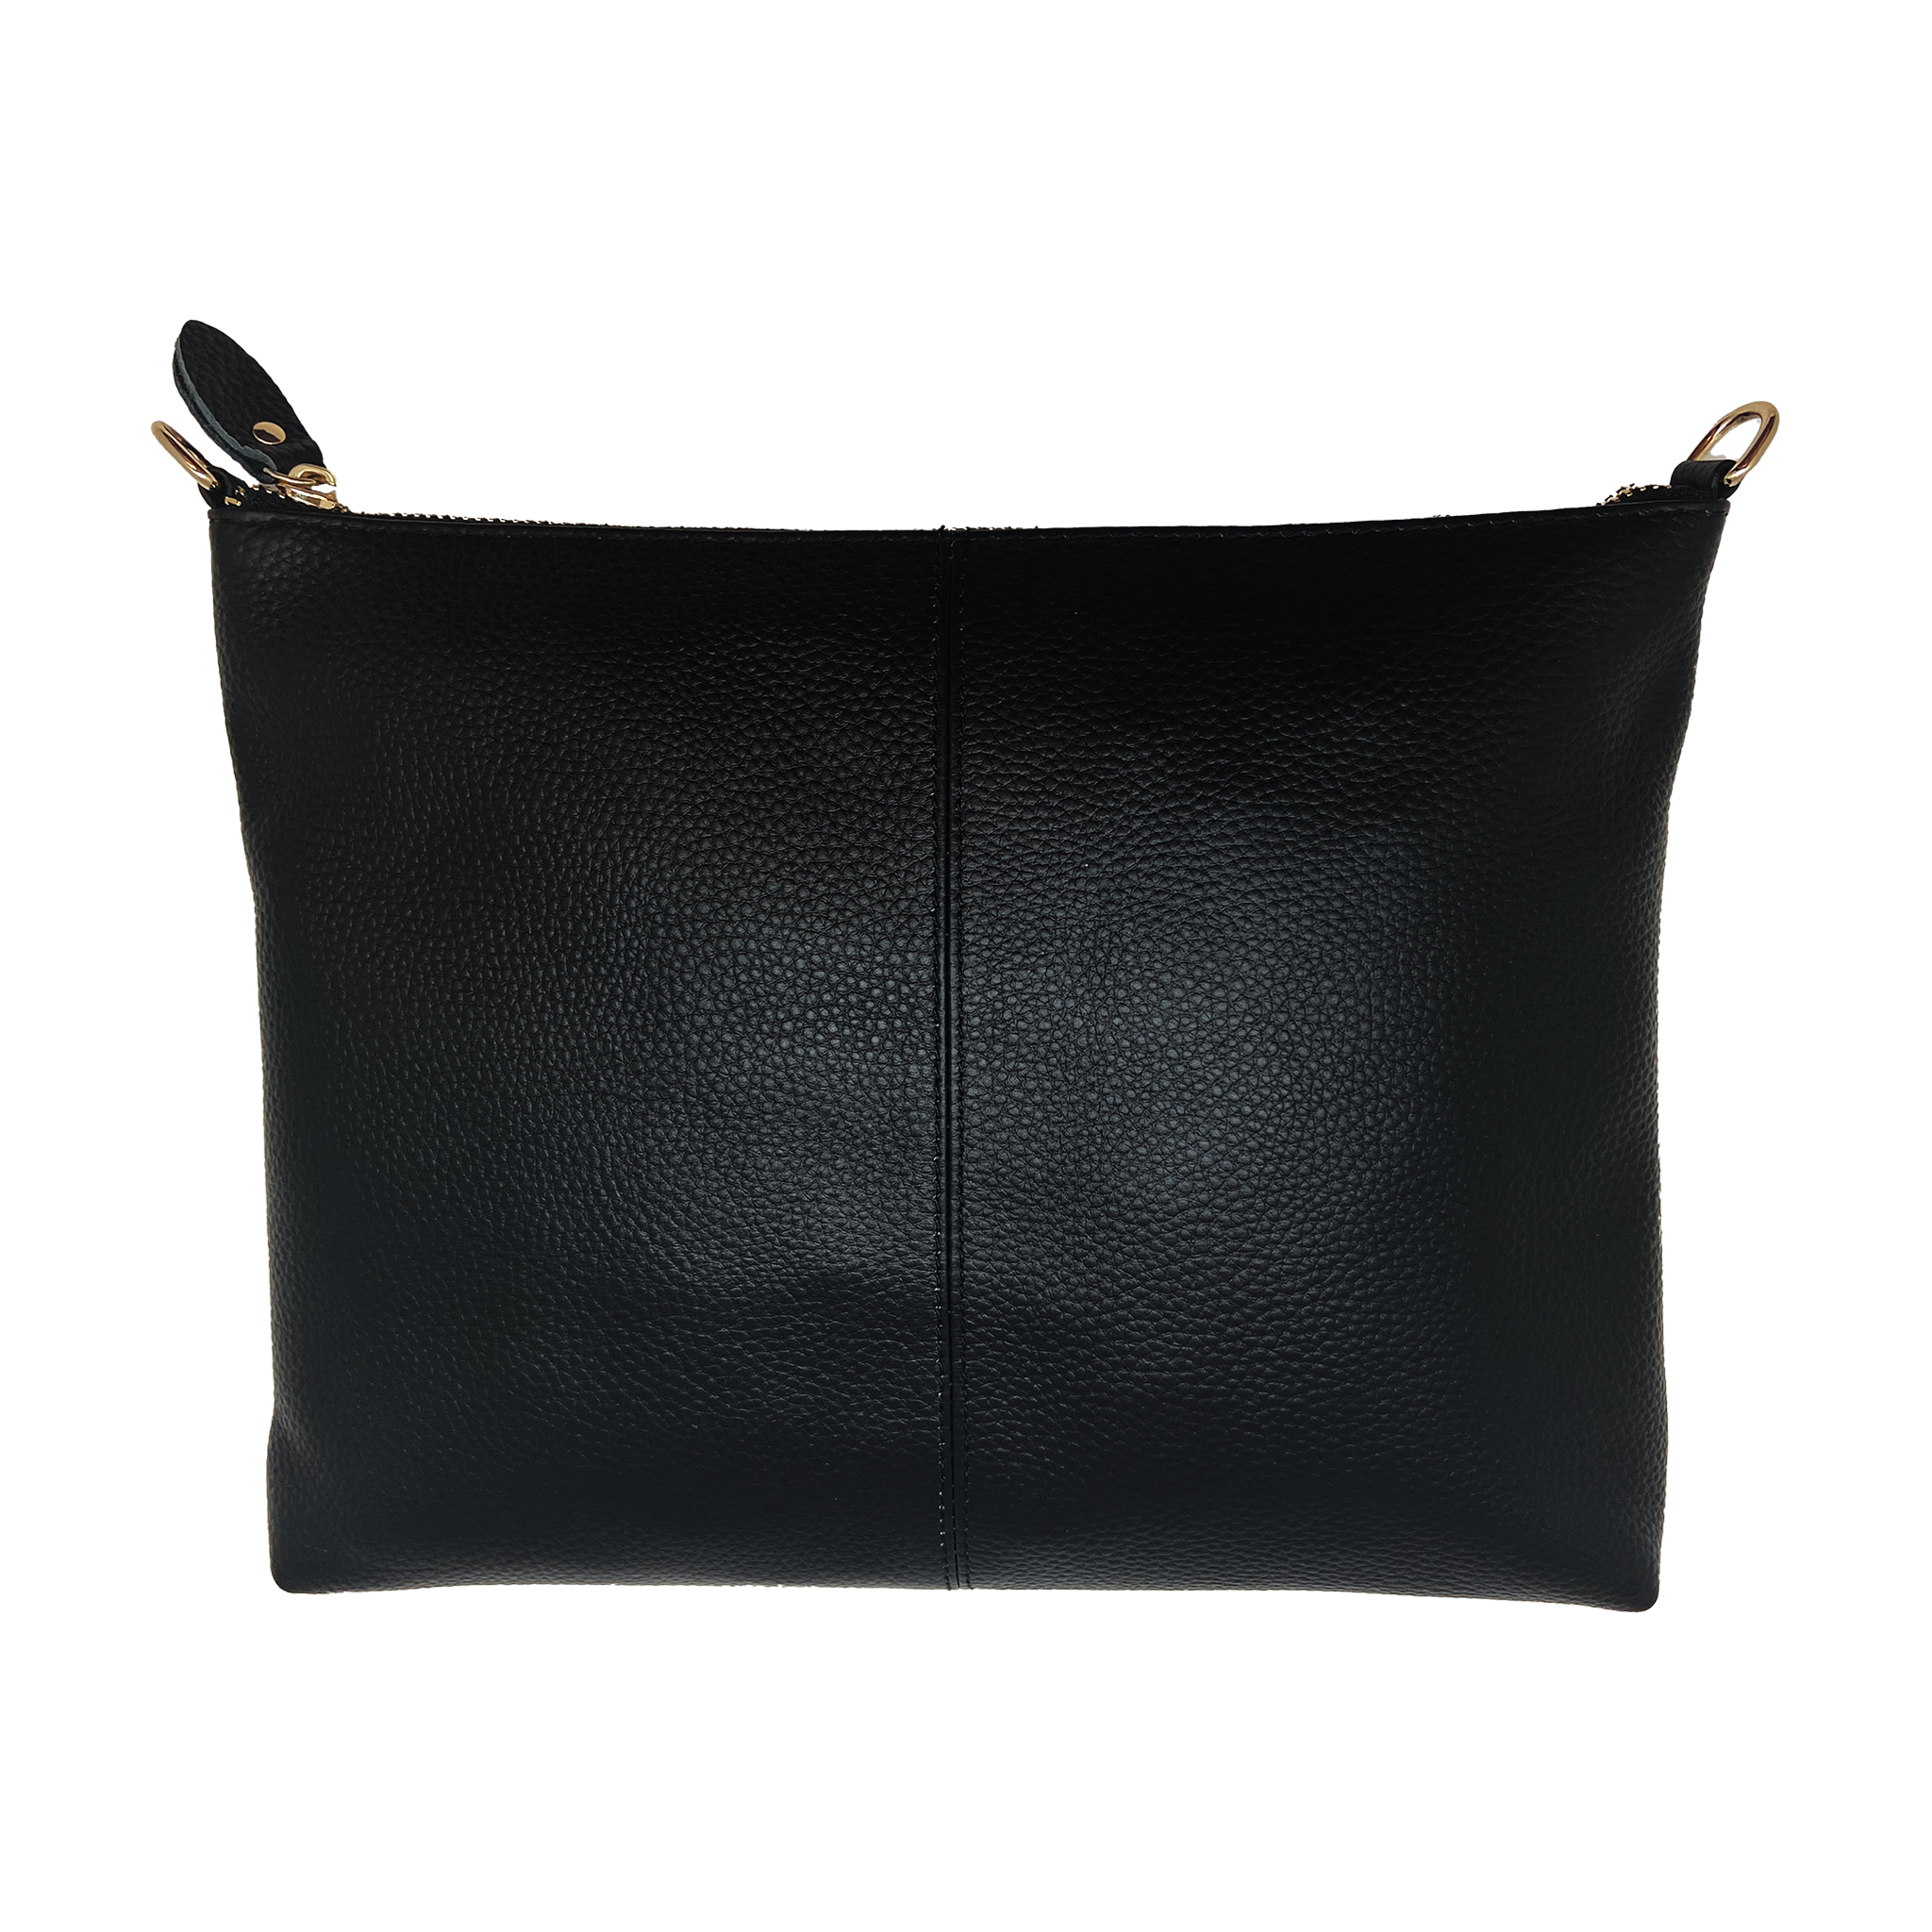 The Brooke in Leather - Black